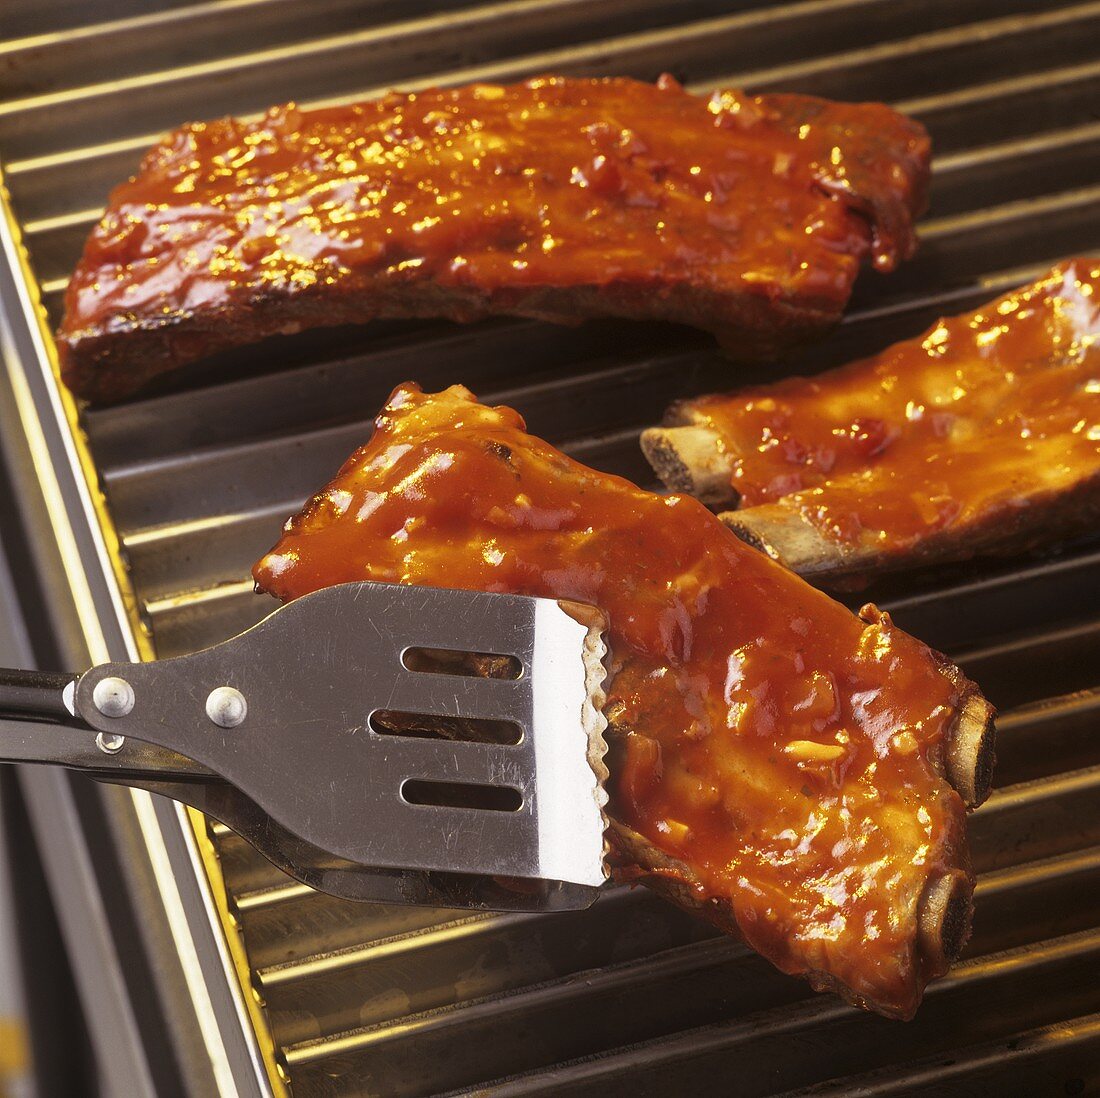 Spare-ribs with barbecue glaze on electric grill